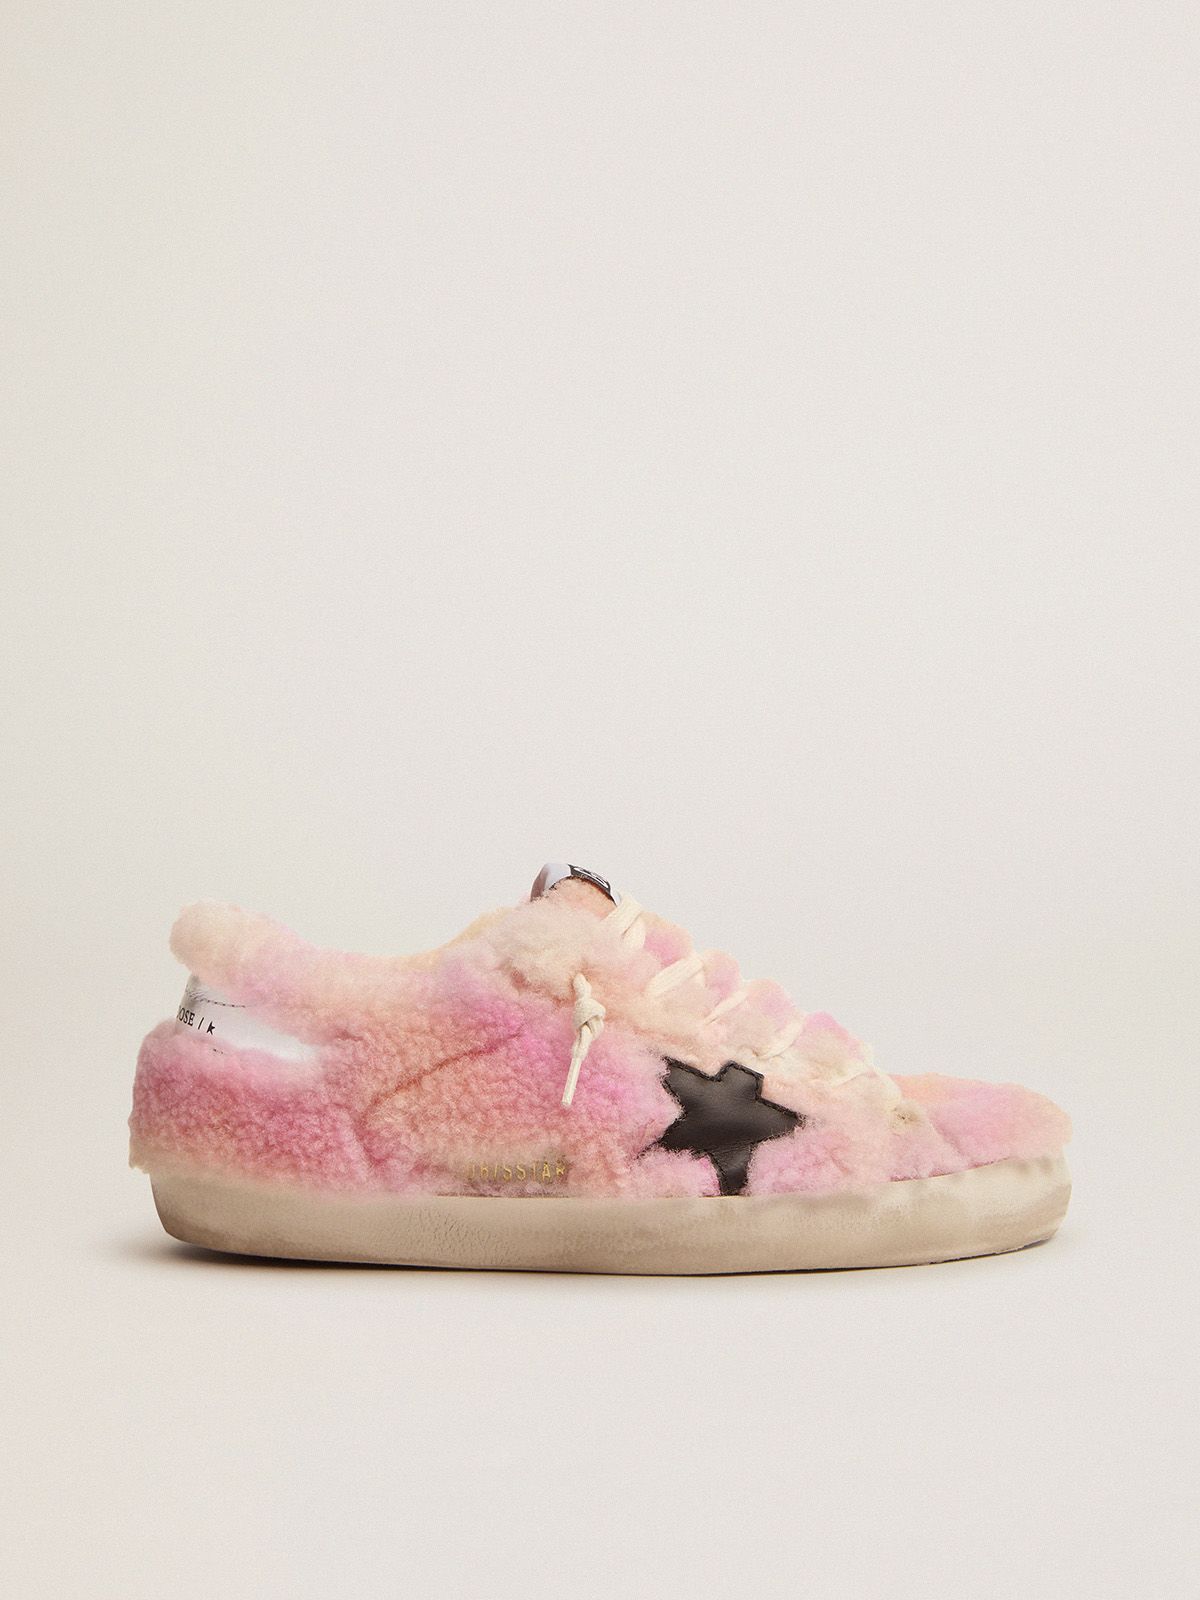 golden goose with and Super-Star upper shearling lining in sneakers tie-dye pink